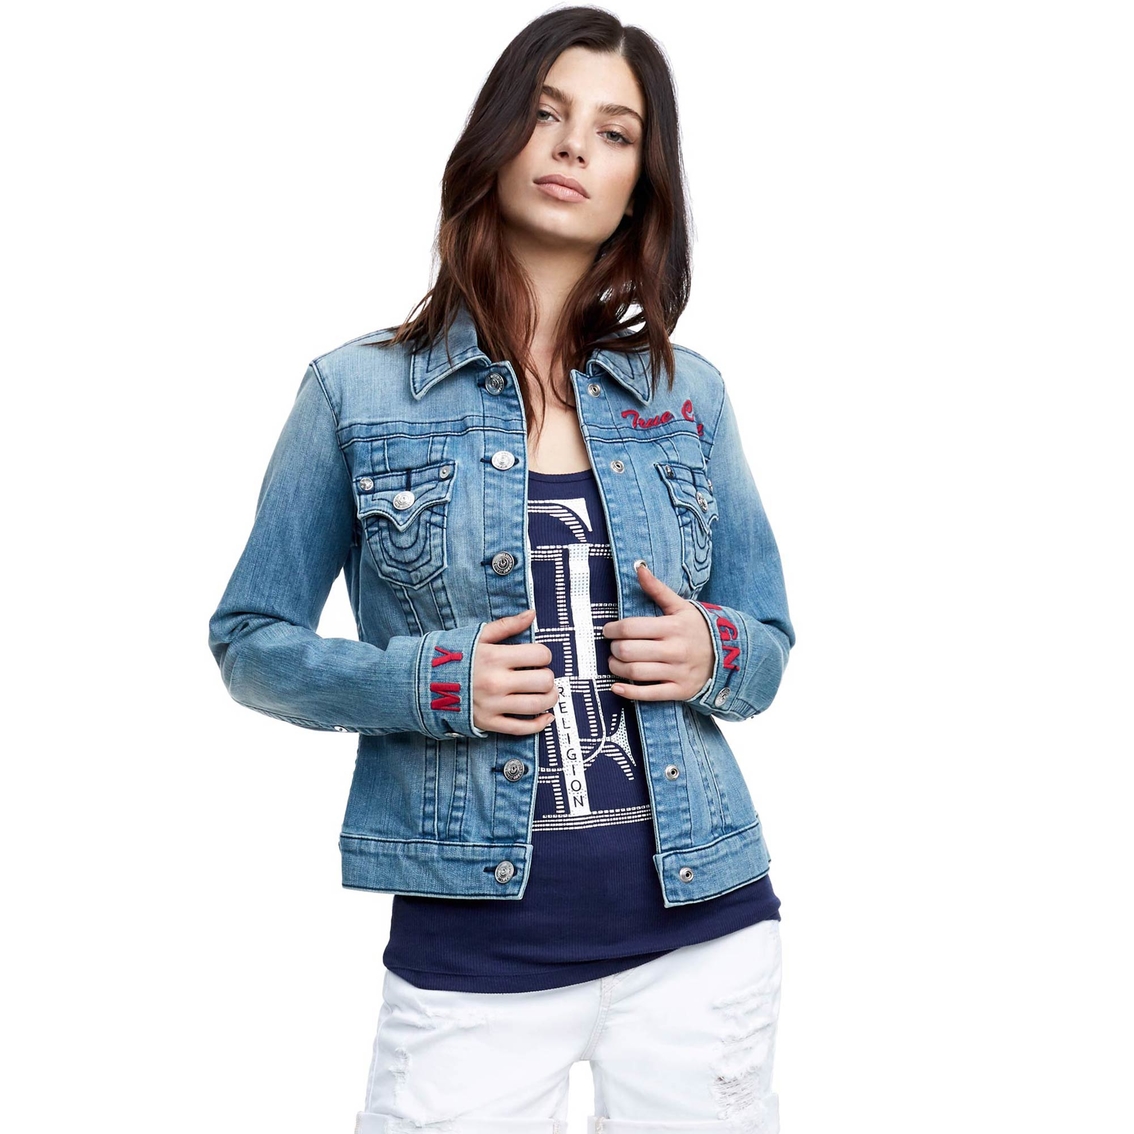 True Religion Denim Jacket With Embroidery | Jackets | Clothing ...